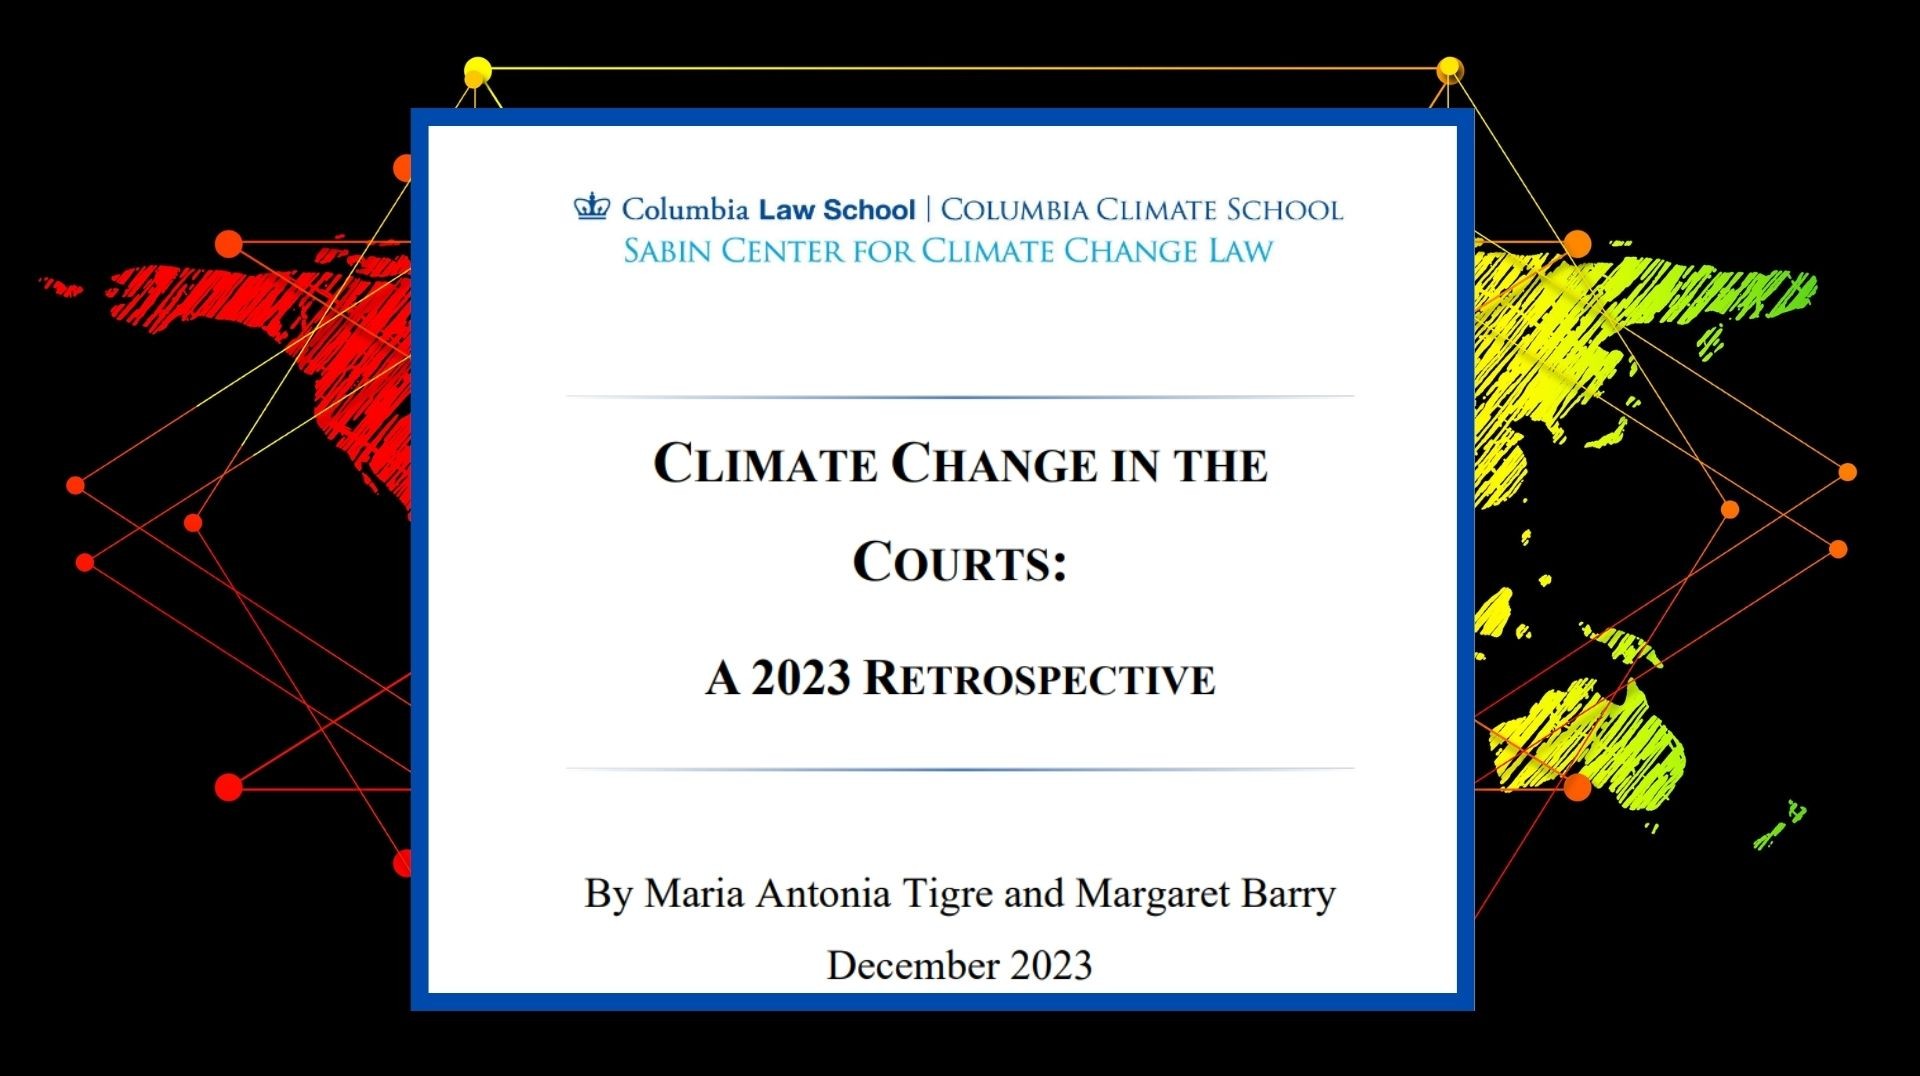 "Climate in Courts 2023"